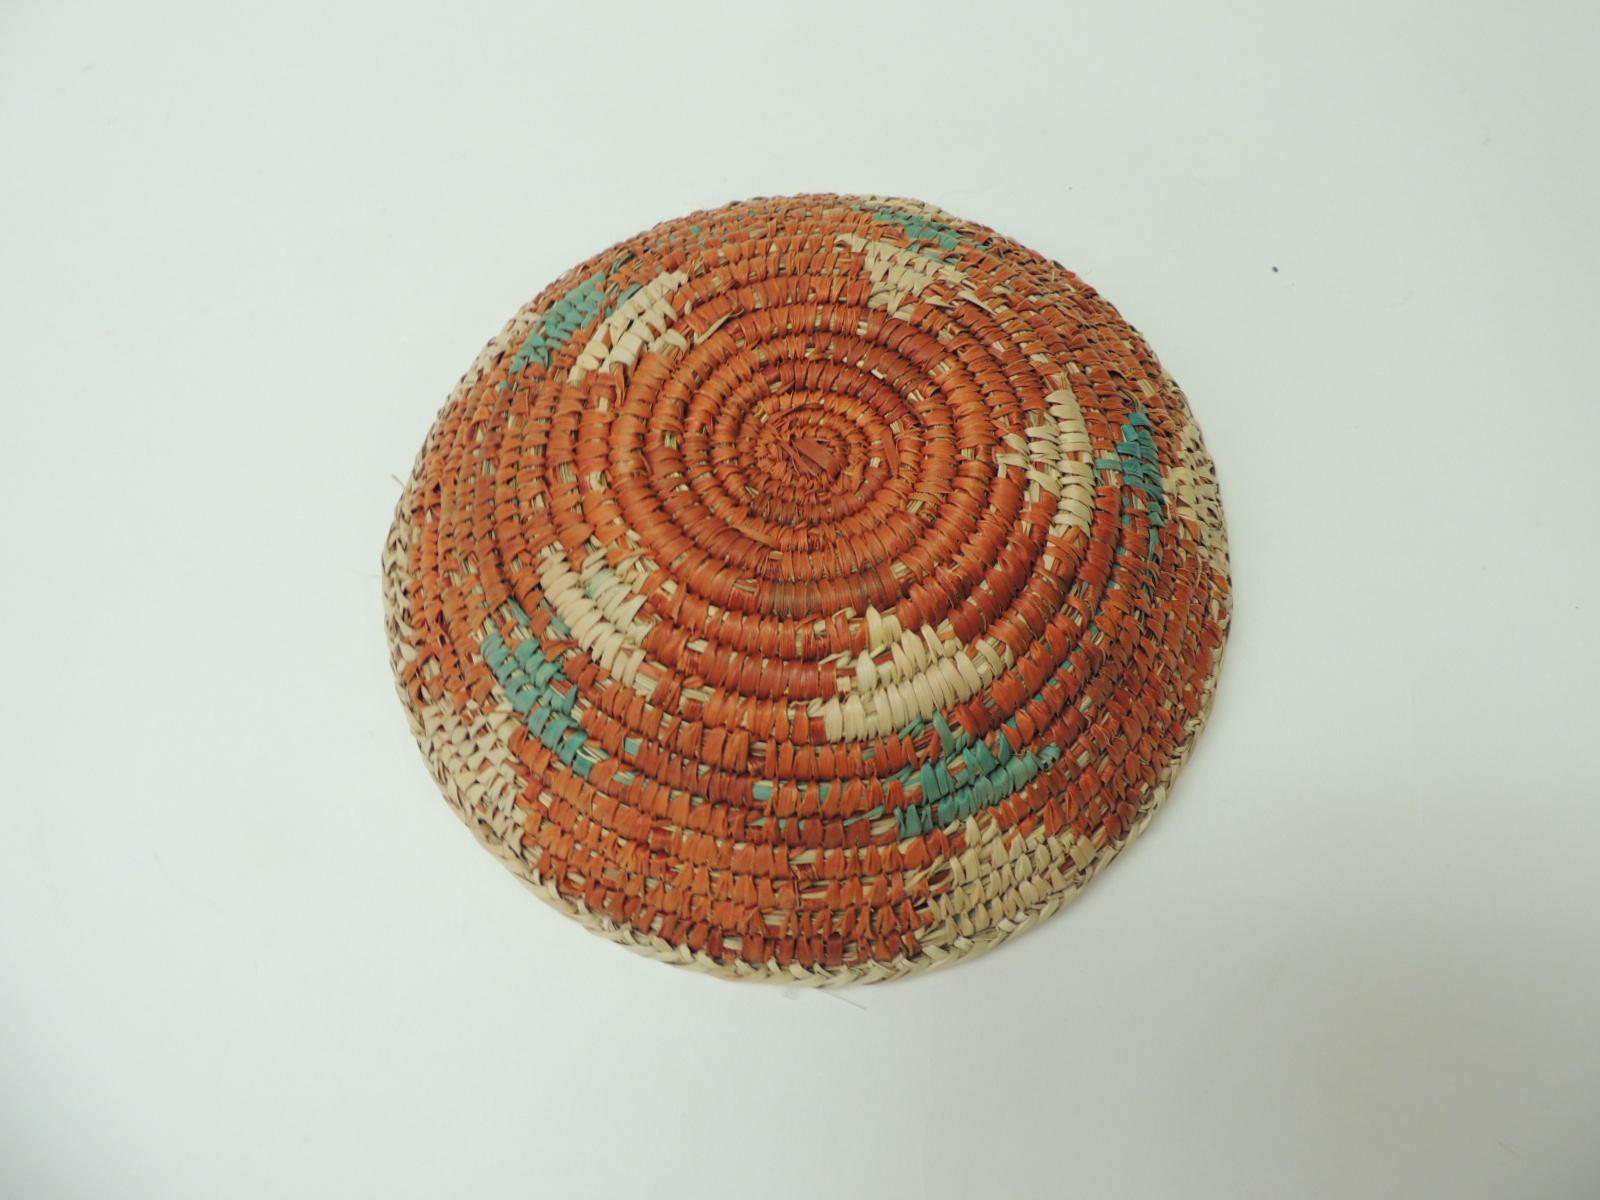 Native American Small Orange and Green Round Tribal Decorative Basket or Bowl